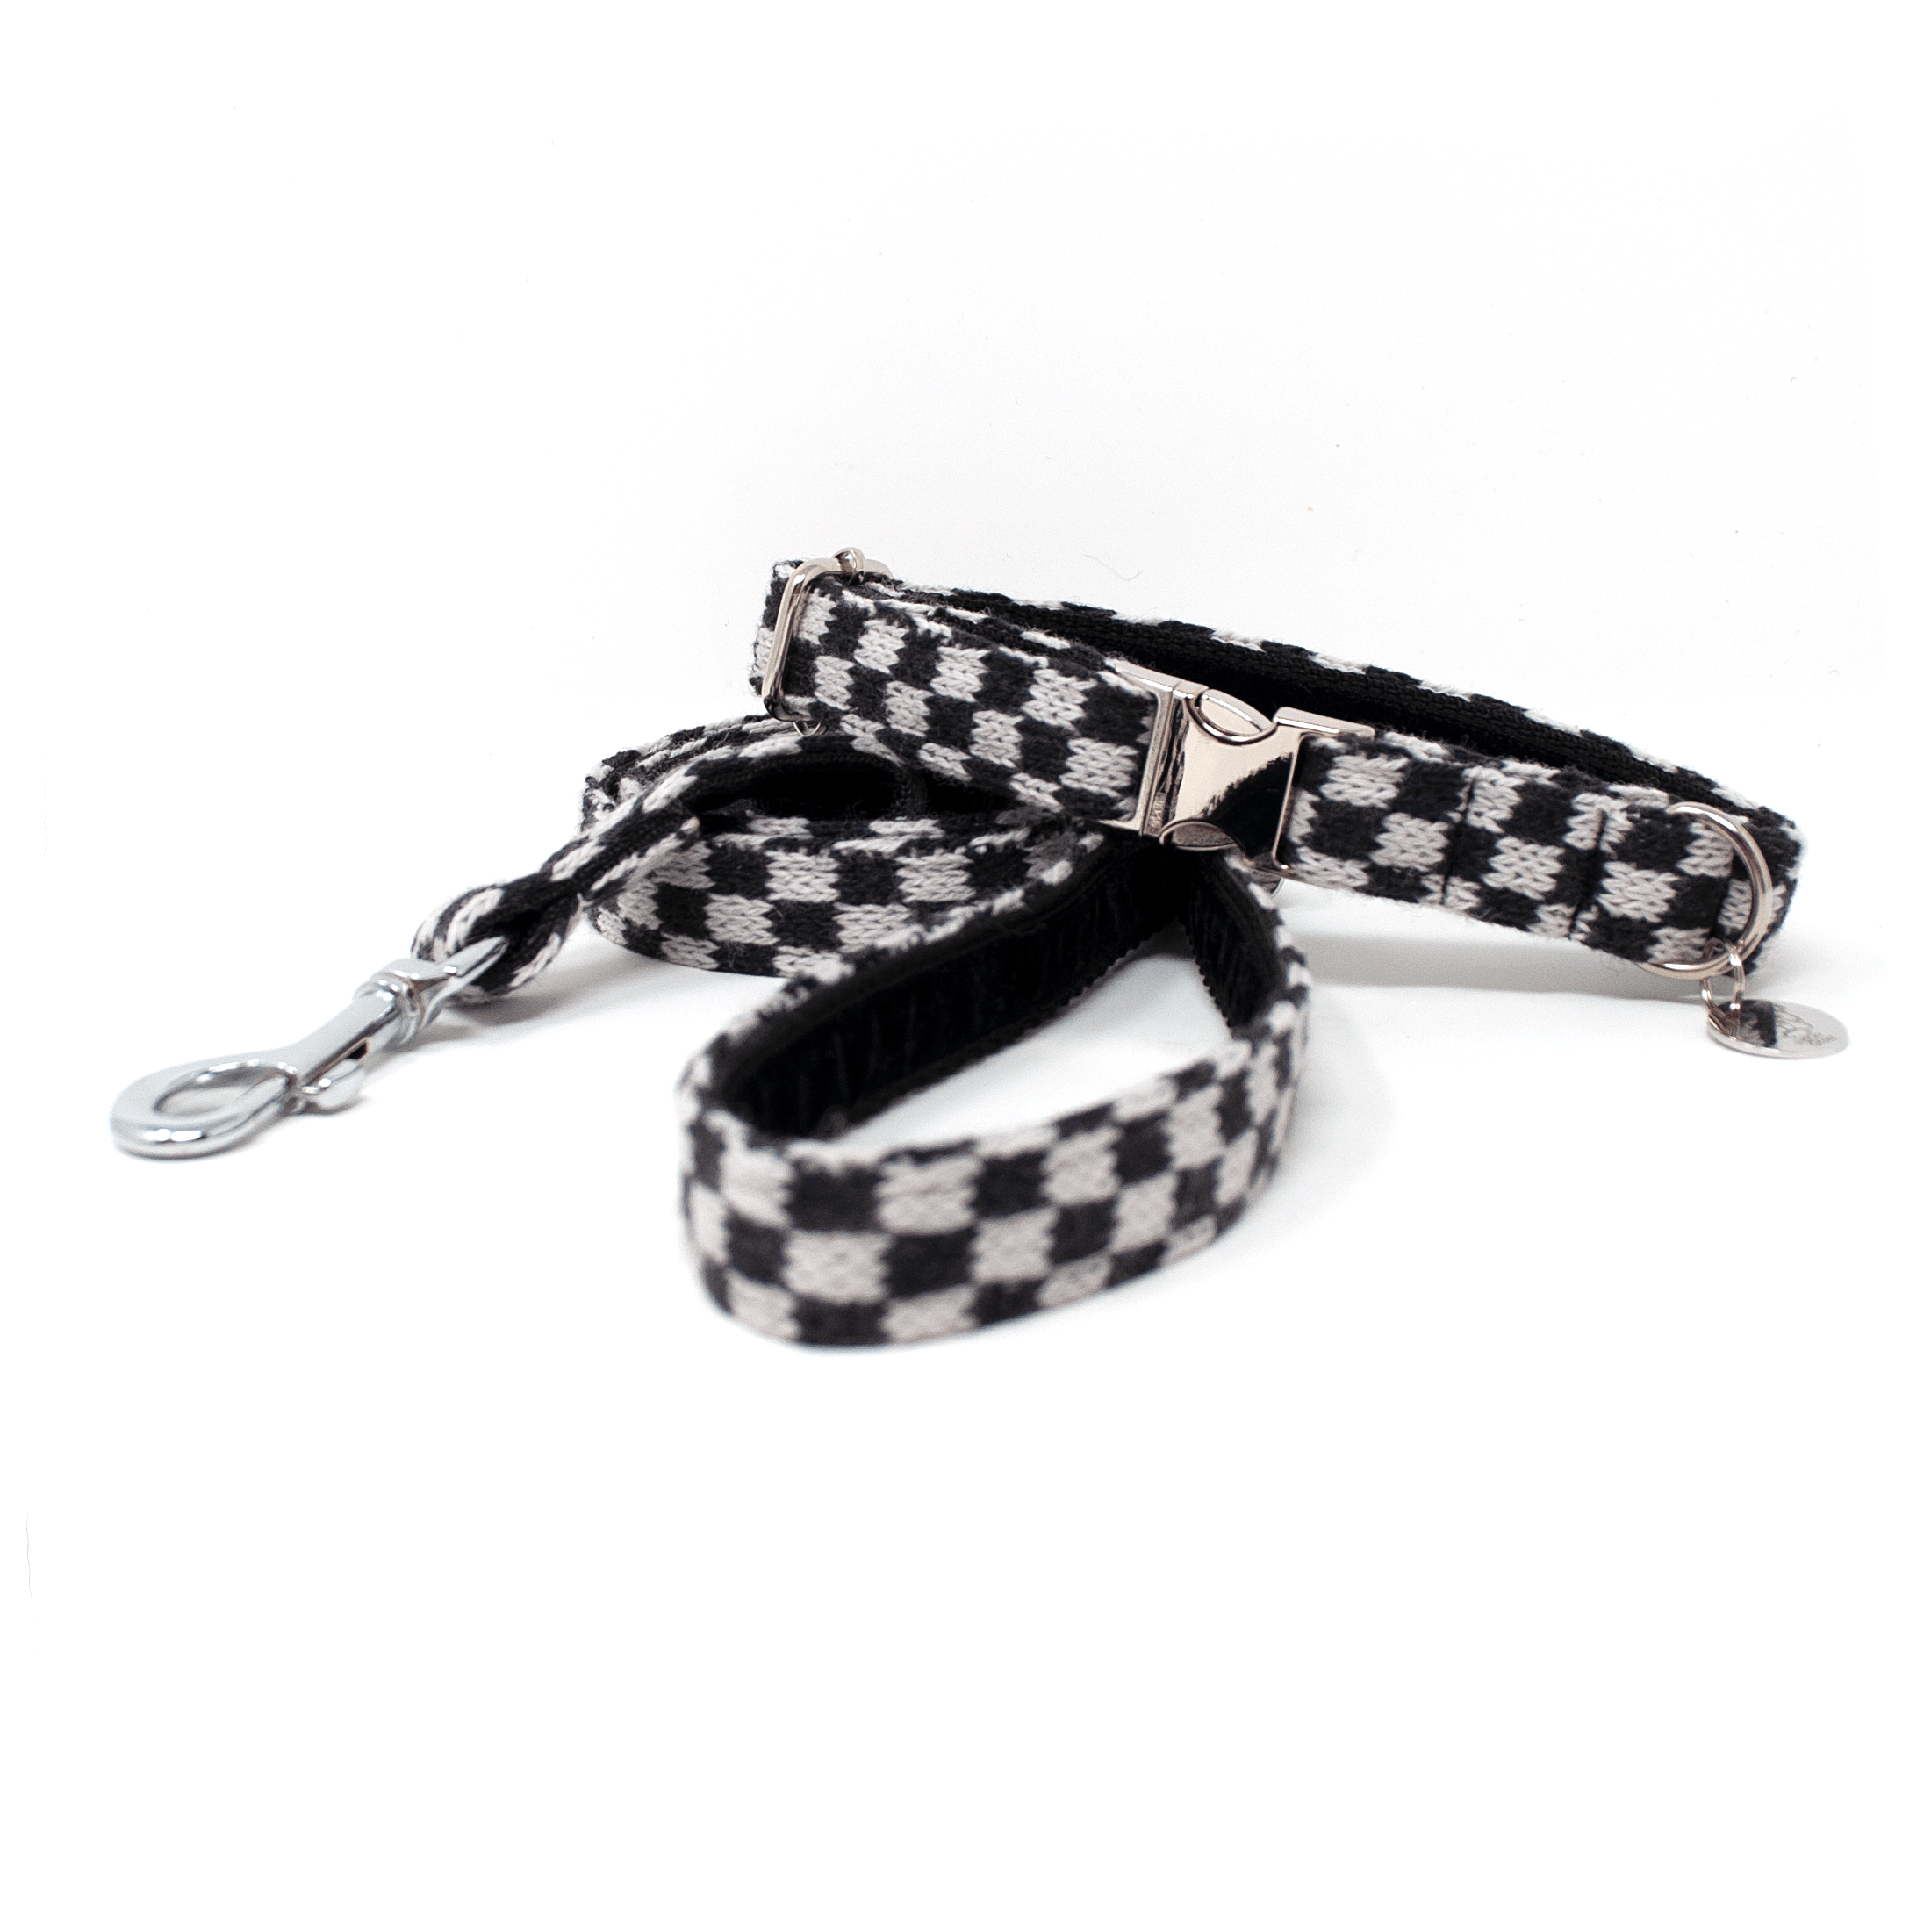 Graphite - SS24 Collection - Luxury Dog Collar